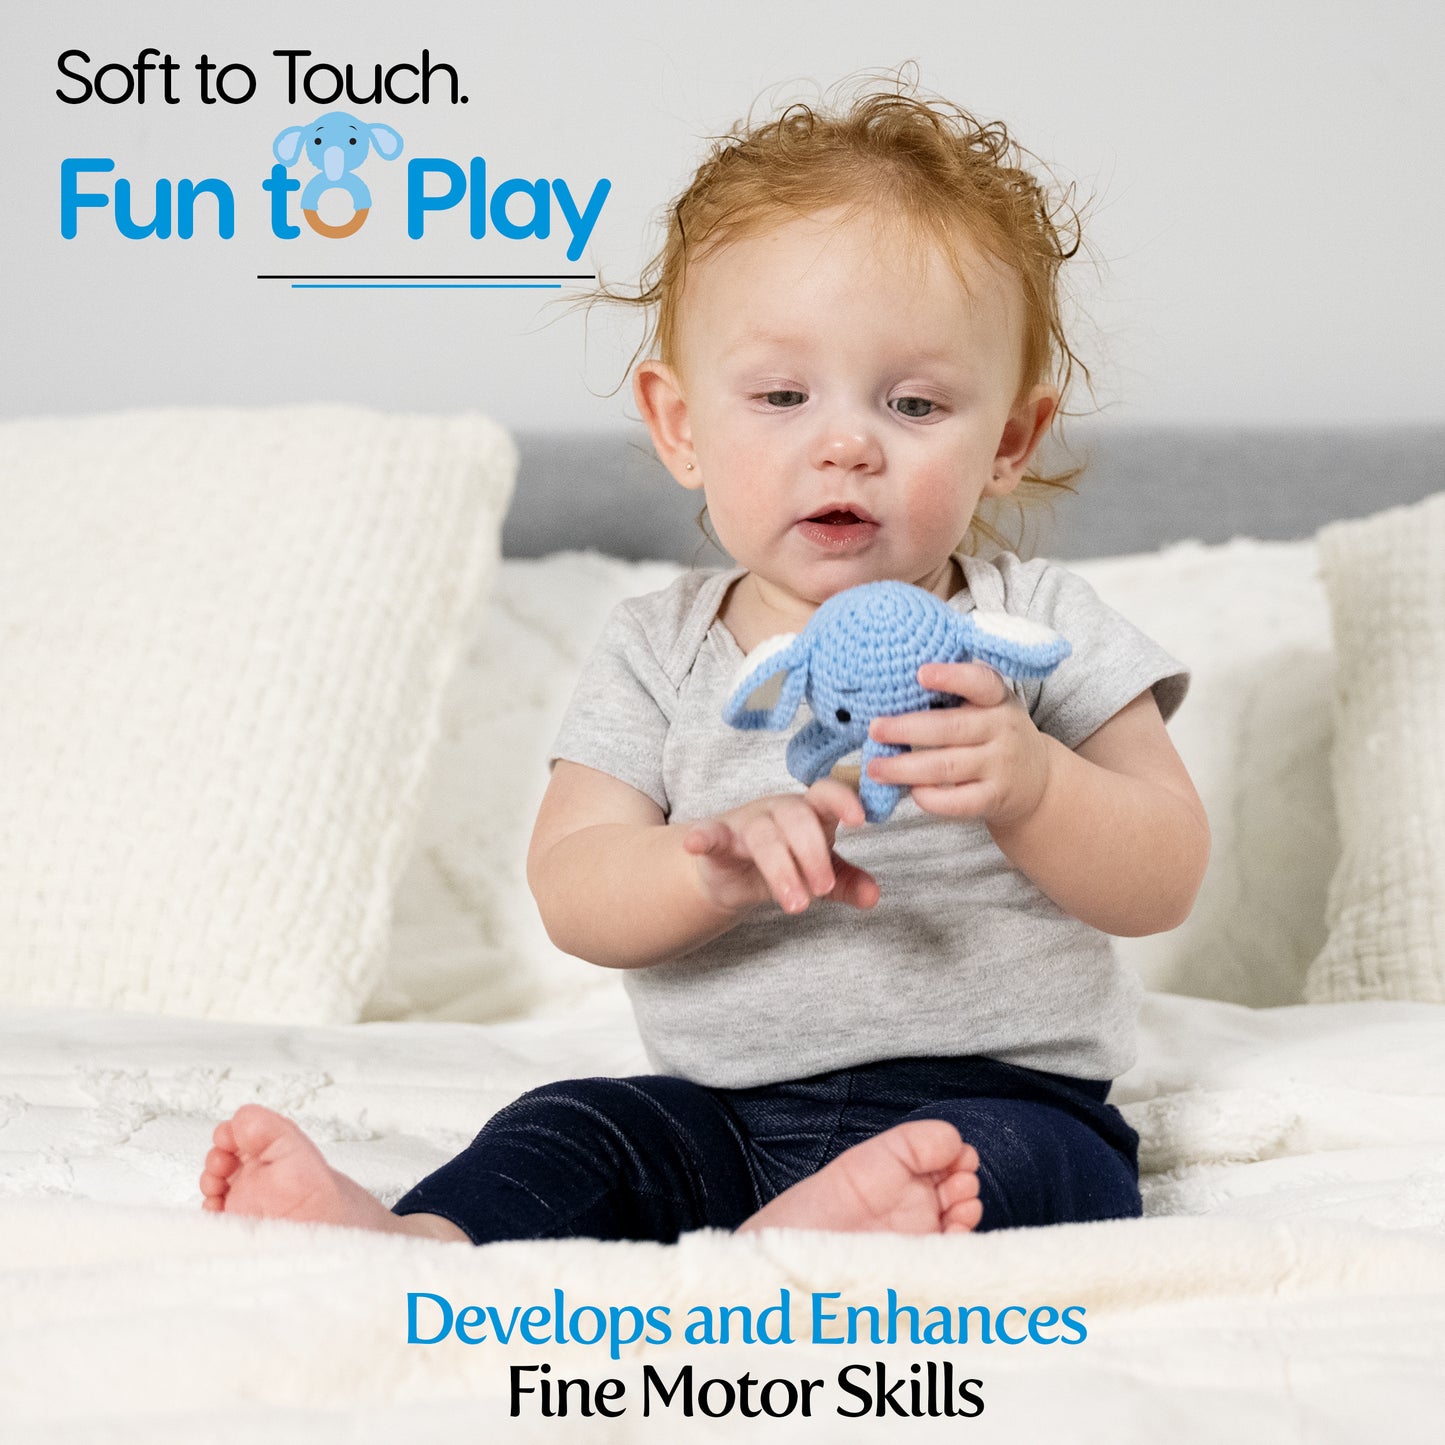 Discusses how the rattle helps develop fine motor skills